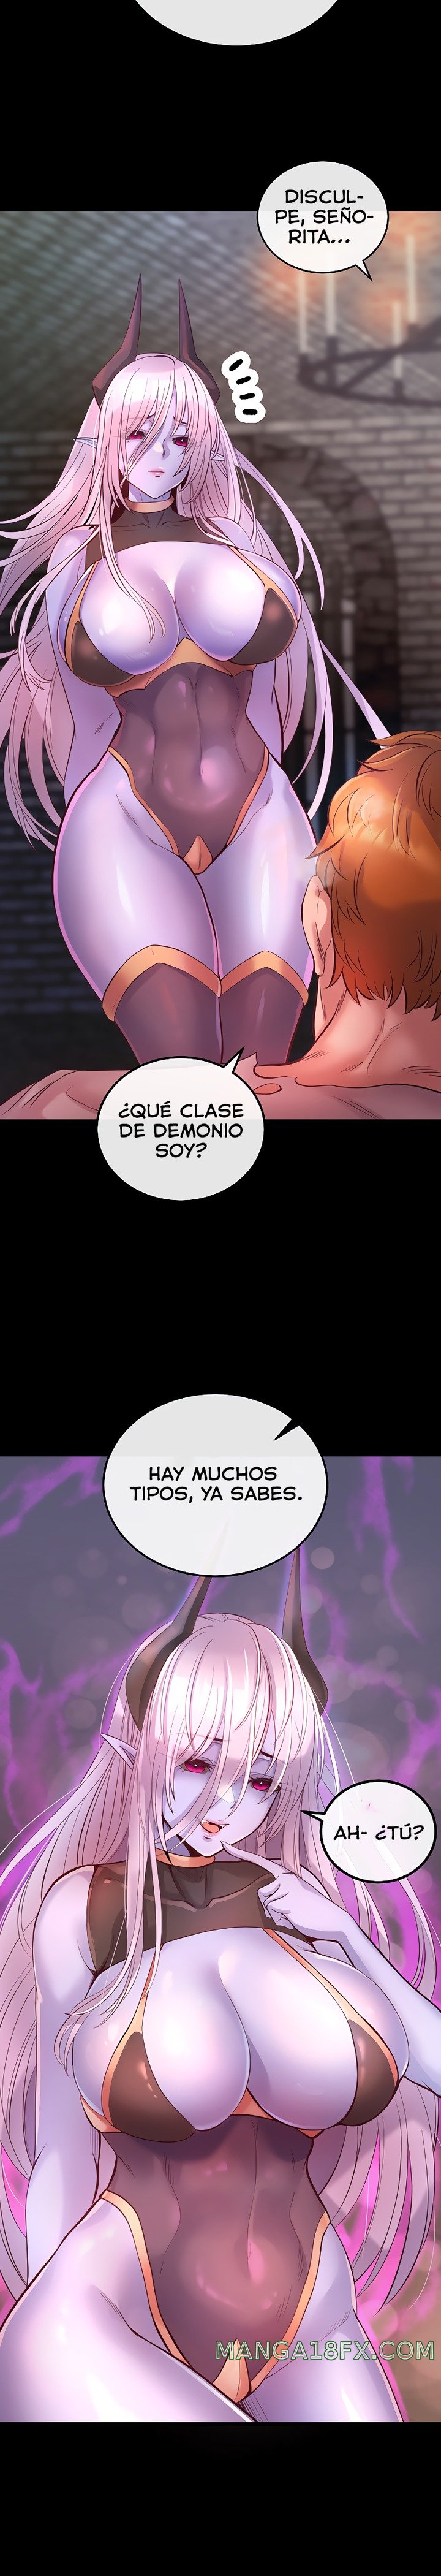 Revenge by Harem Raw - Chapter 1 Page 15